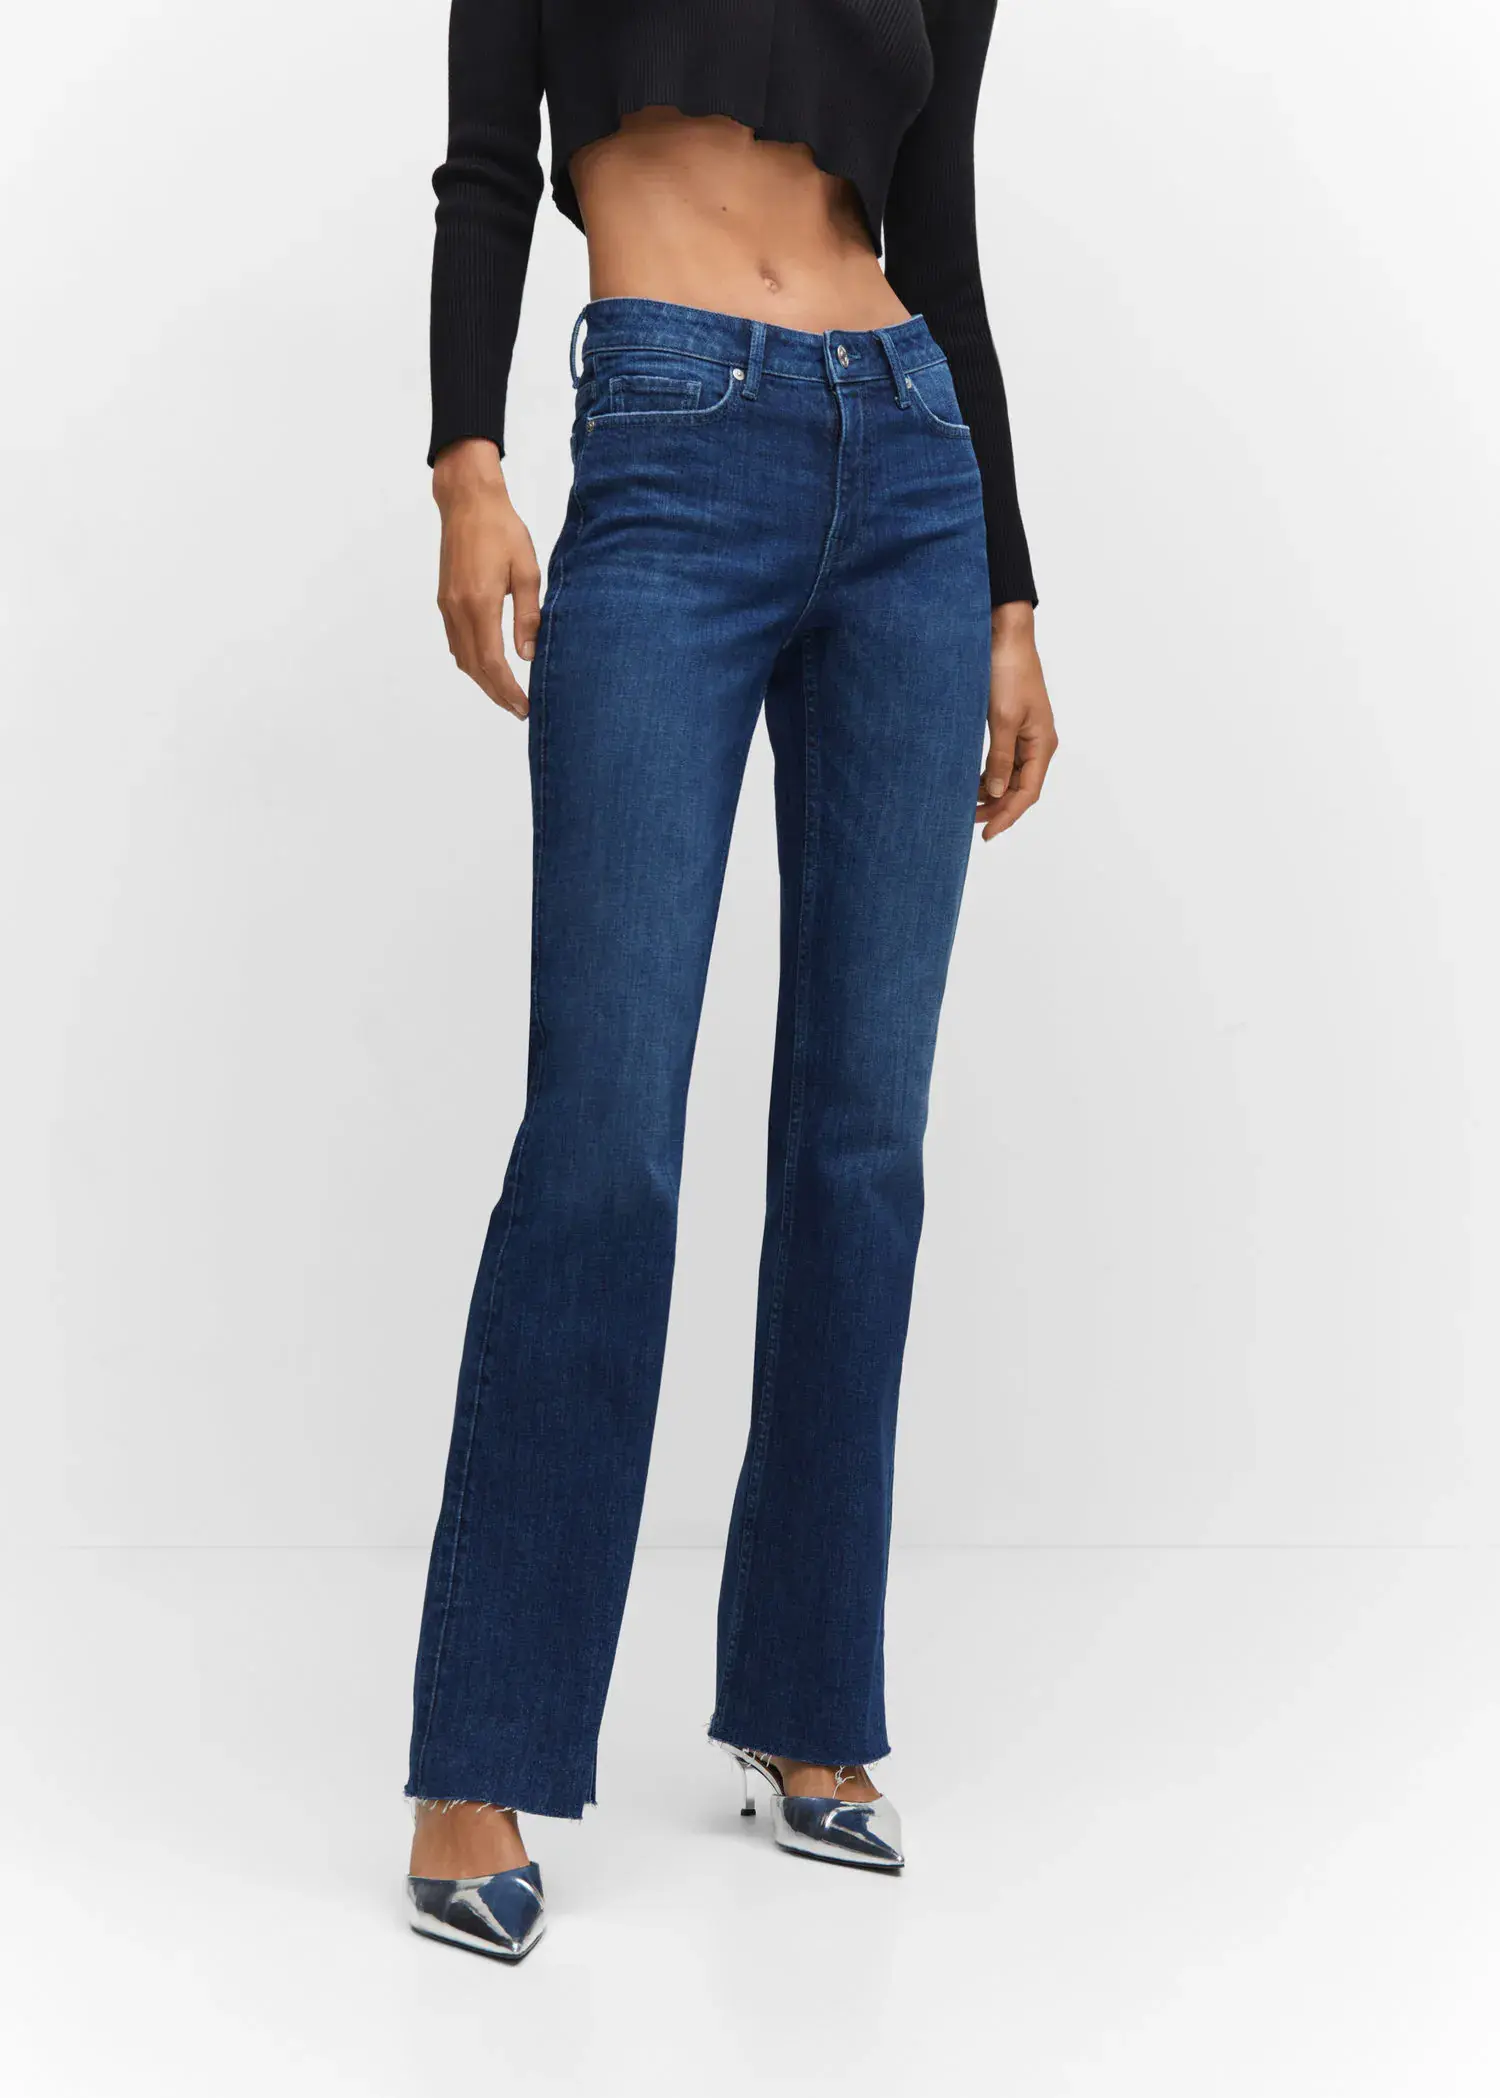 Mango Jeans flare taille normale. 2